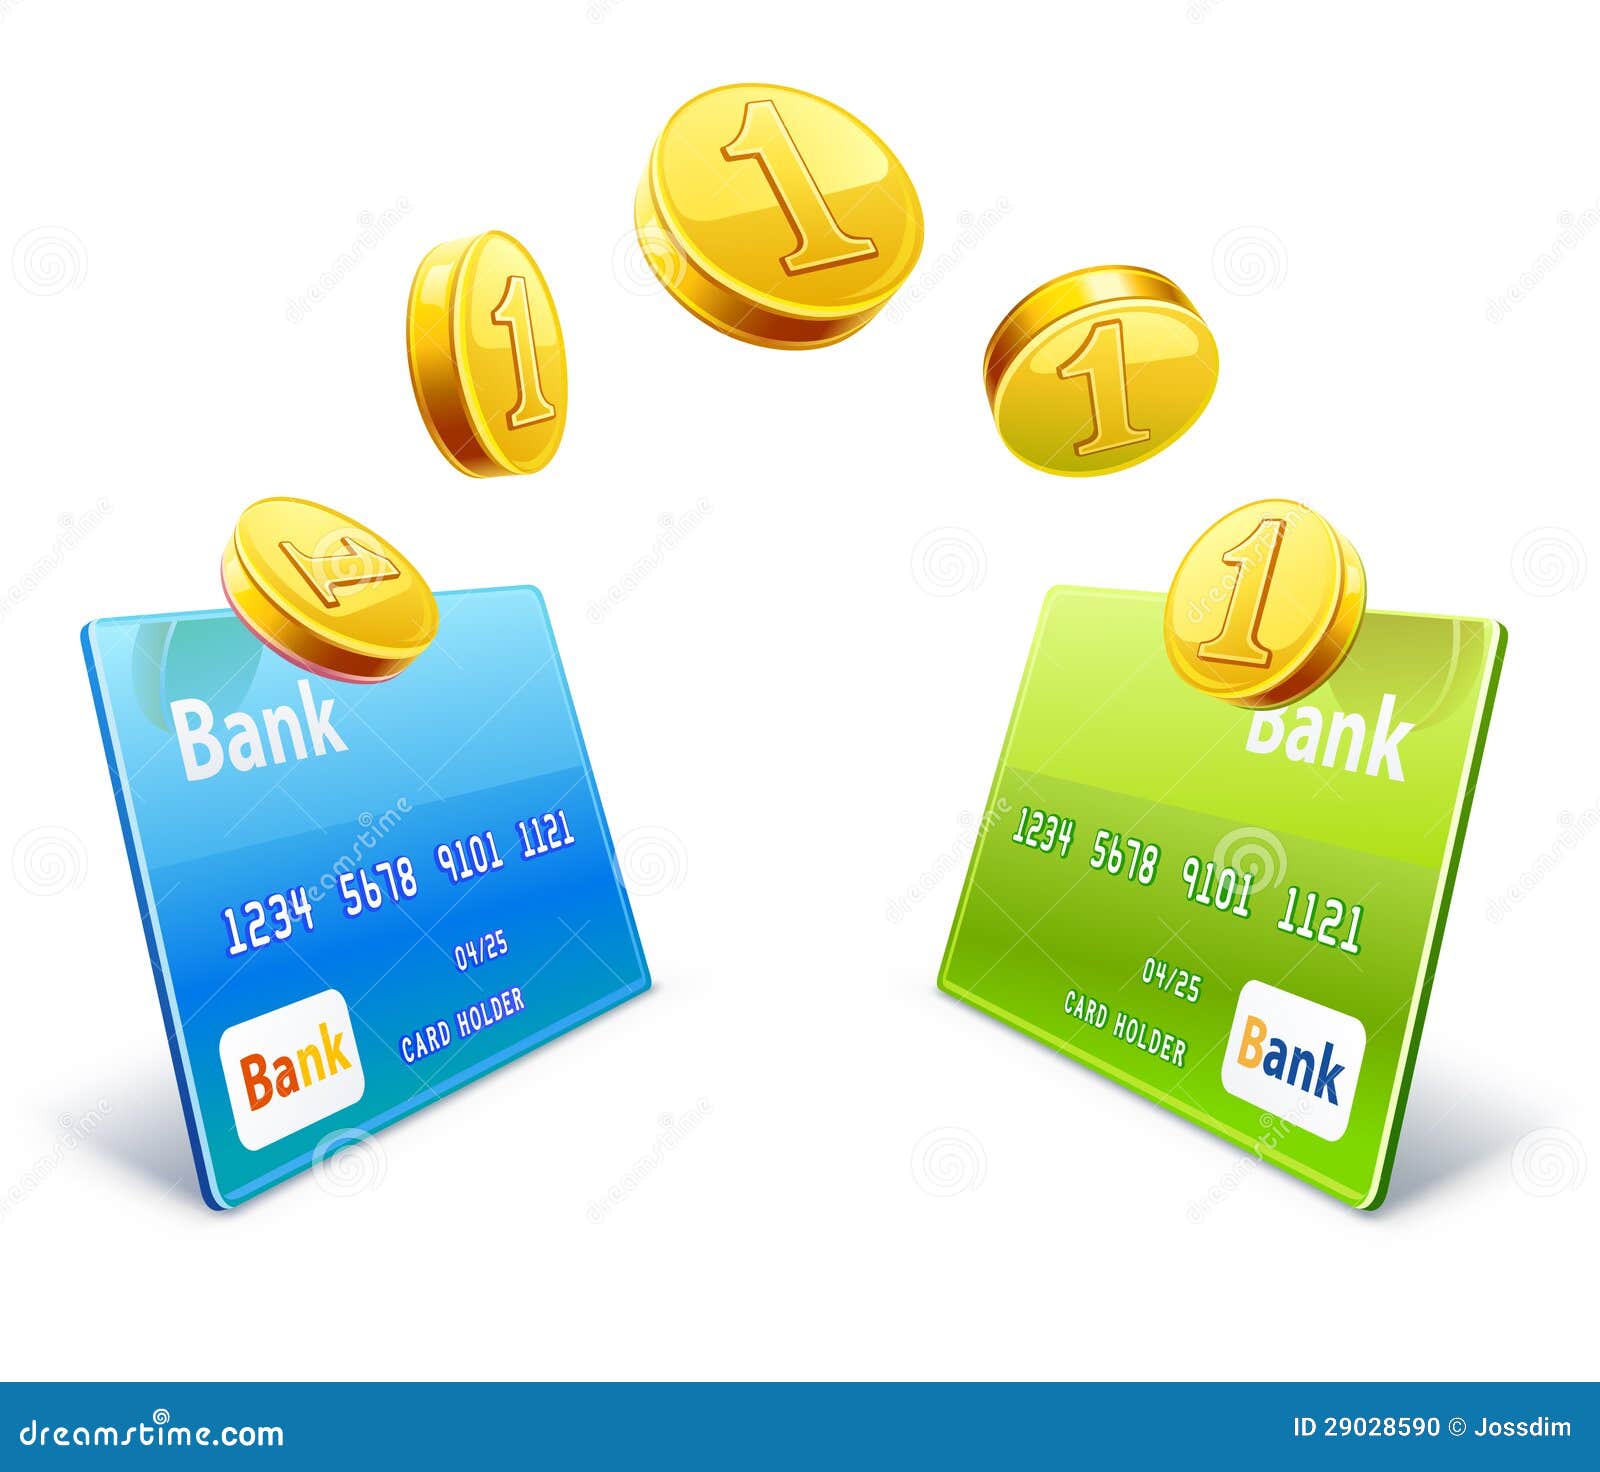 Money Transfer From Card To Card Stock Vector - Illustration of white, bank: 29028590